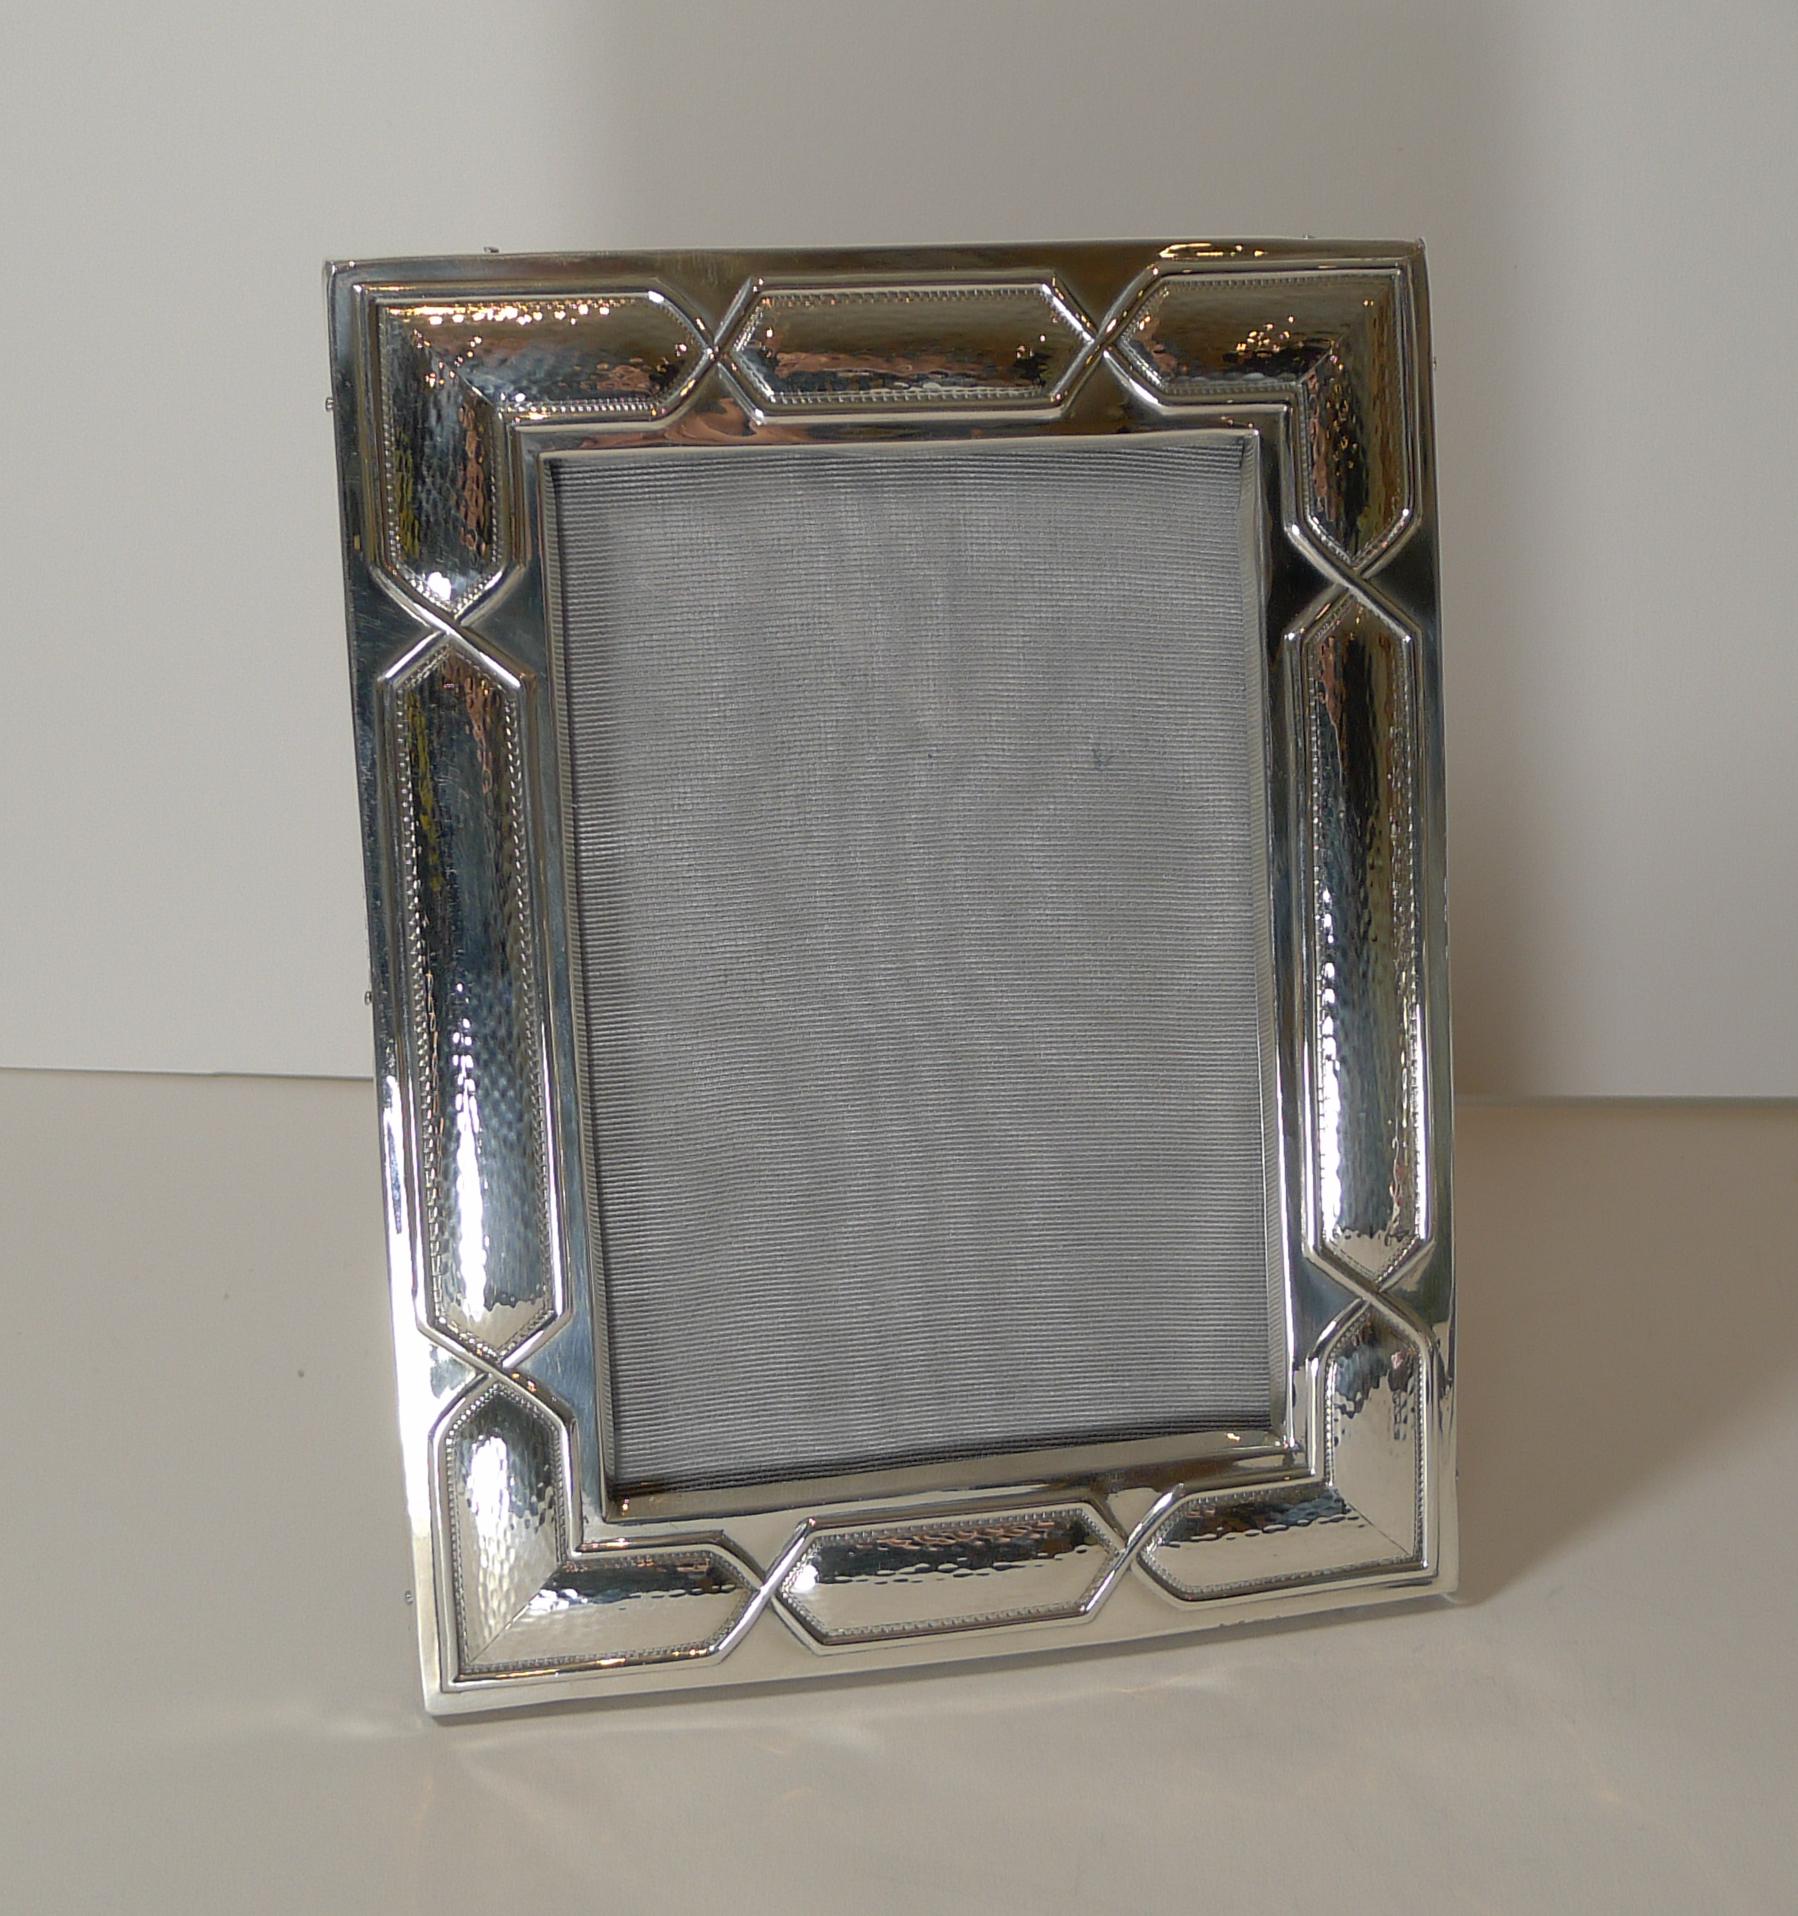 A magnificent and rare (I have never seen this design before) sterling silver photograph frame with a beautiful geometric (almost Celtic) design.

The backing is made from solid English Oak with a two-way folding easel stand allowing for the frame